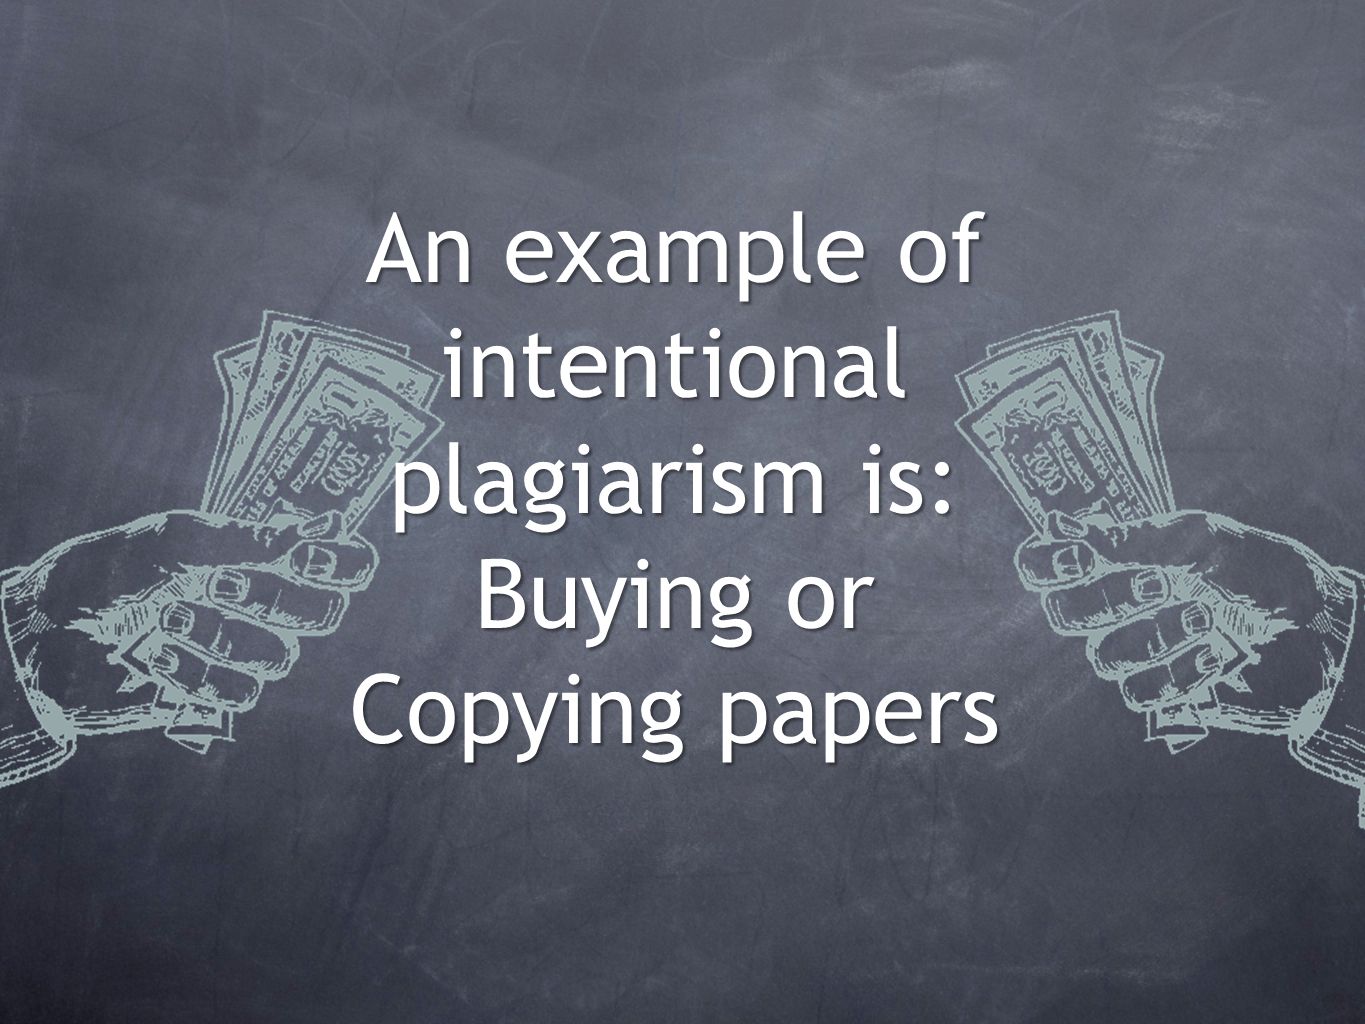 An example of intentional plagiarism is: Buying or Copying papers